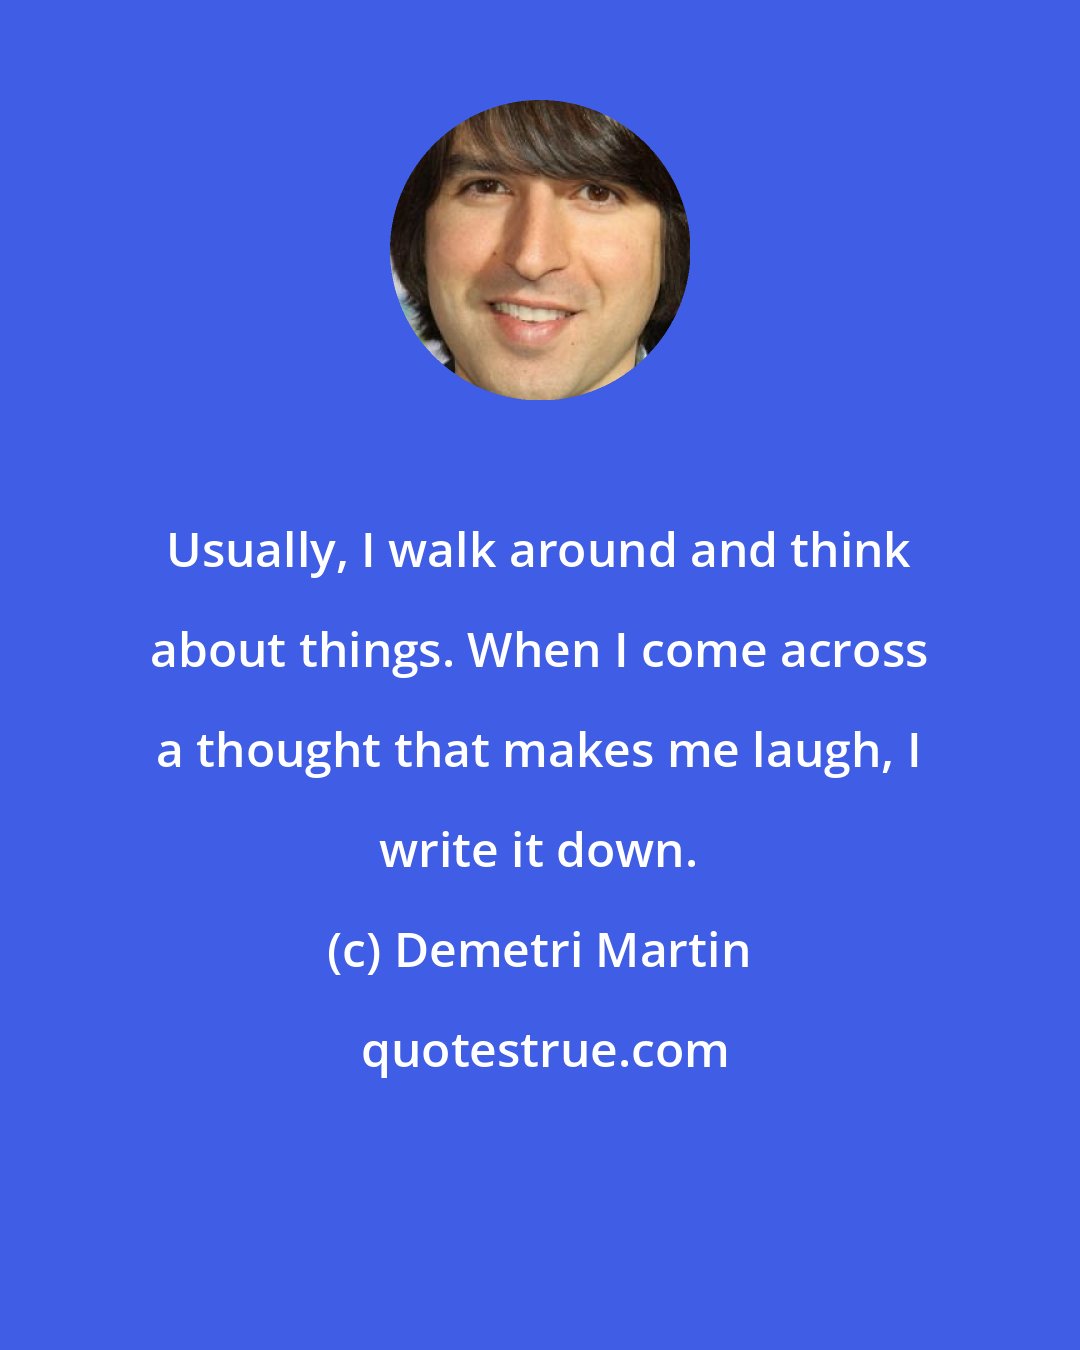 Demetri Martin: Usually, I walk around and think about things. When I come across a thought that makes me laugh, I write it down.